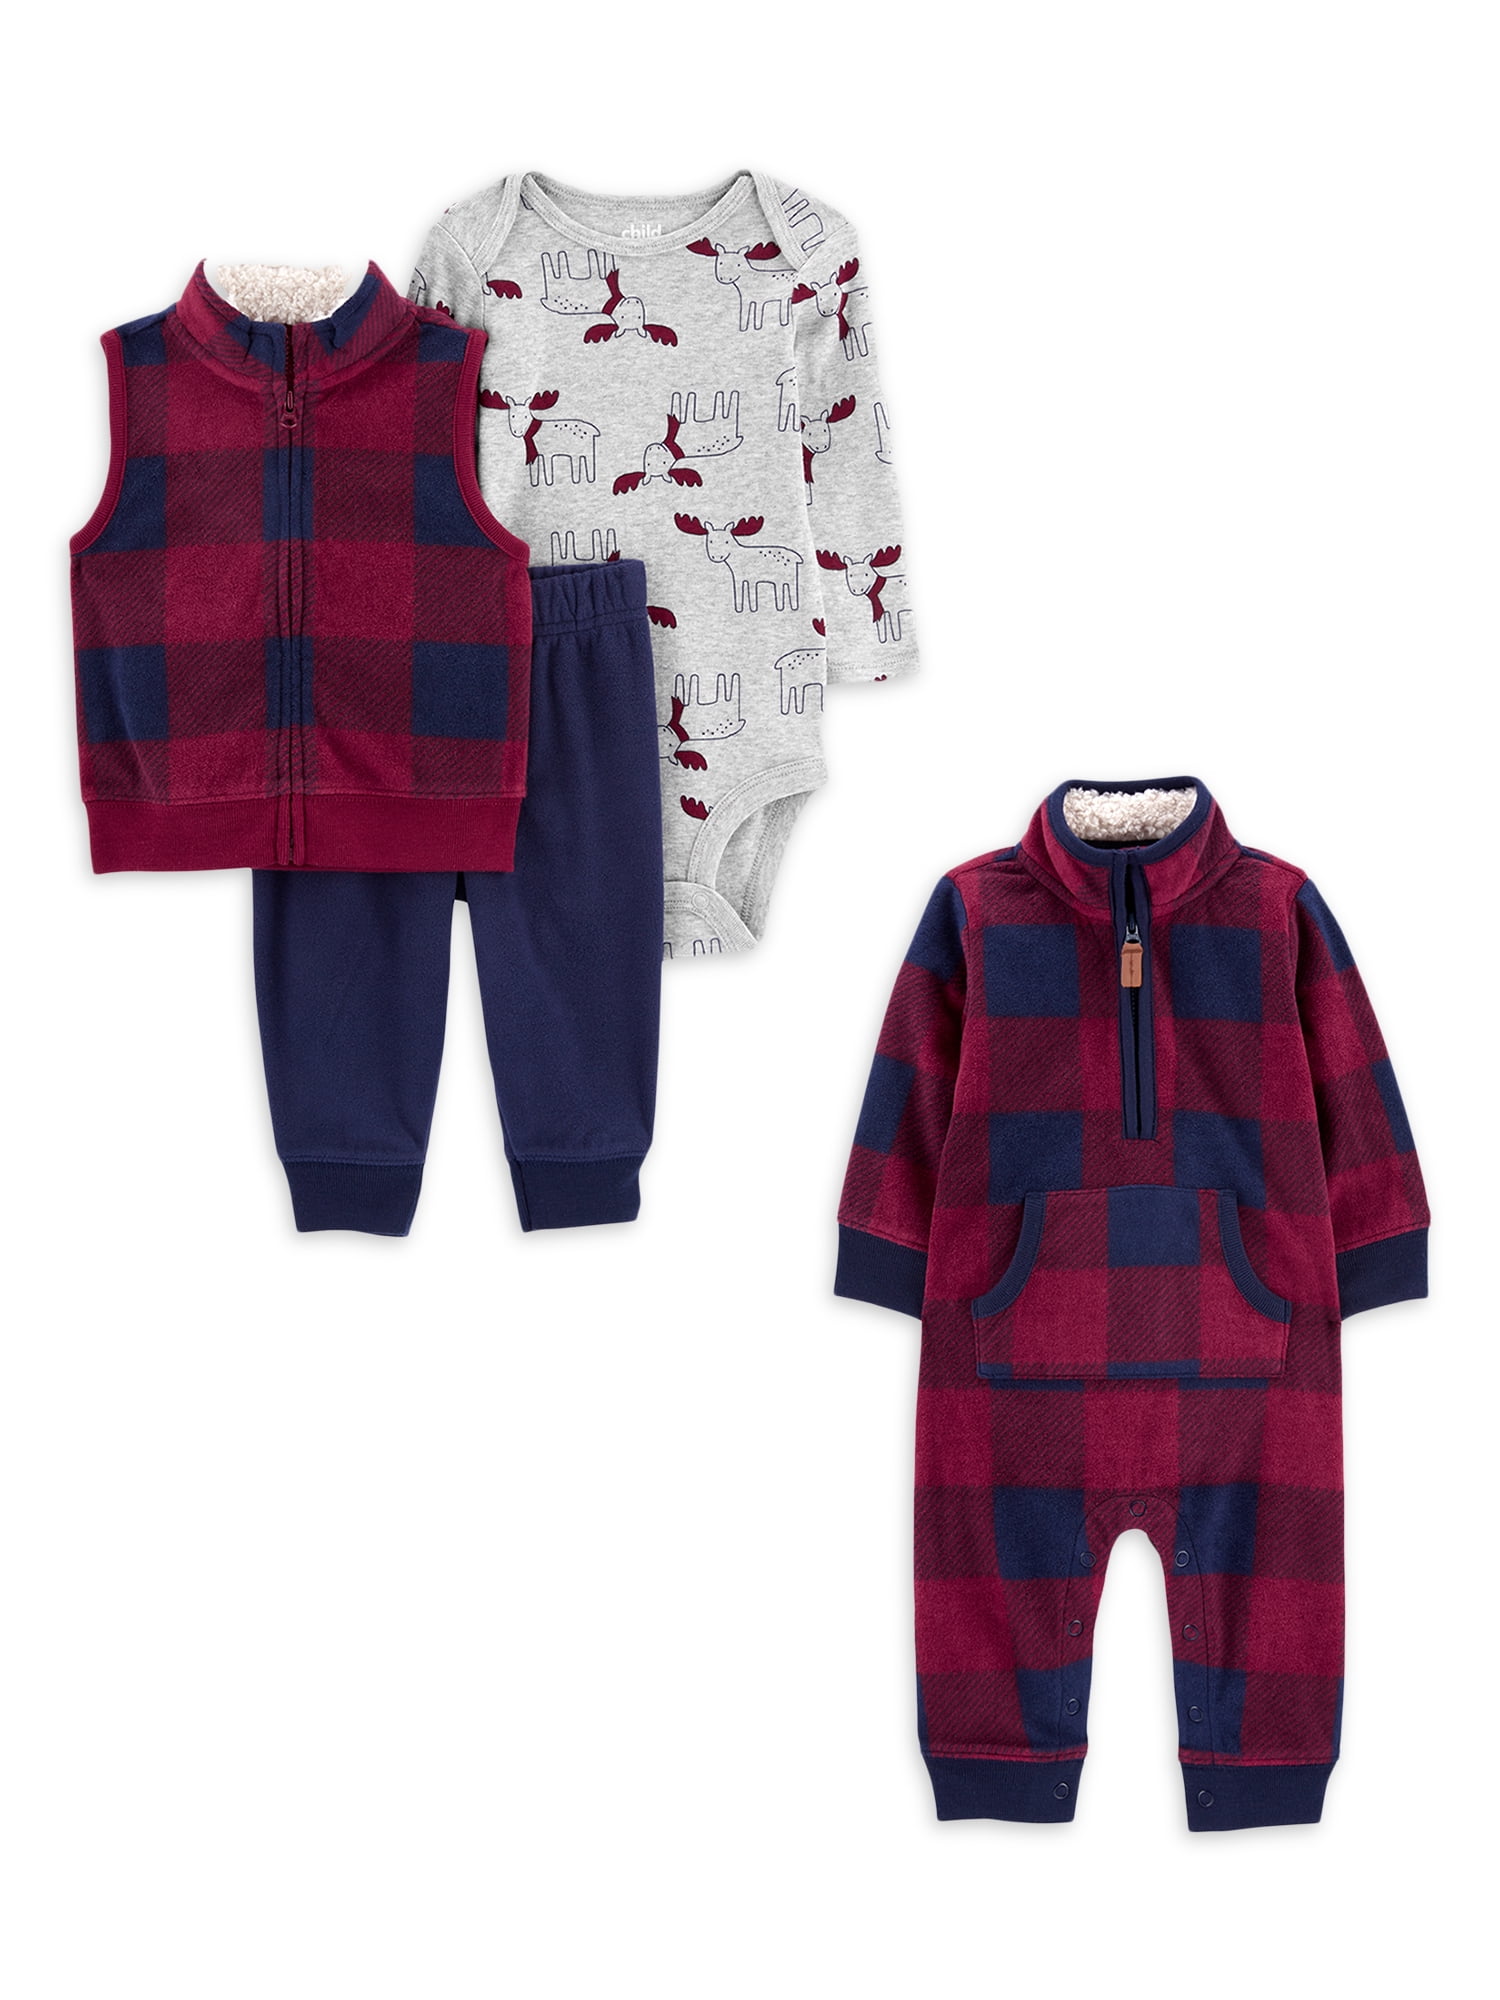 Carter's Child of Mine Baby Boy Vest Outfit and Jumpsuit Set, 4-Piece, Sizes  0-24M 